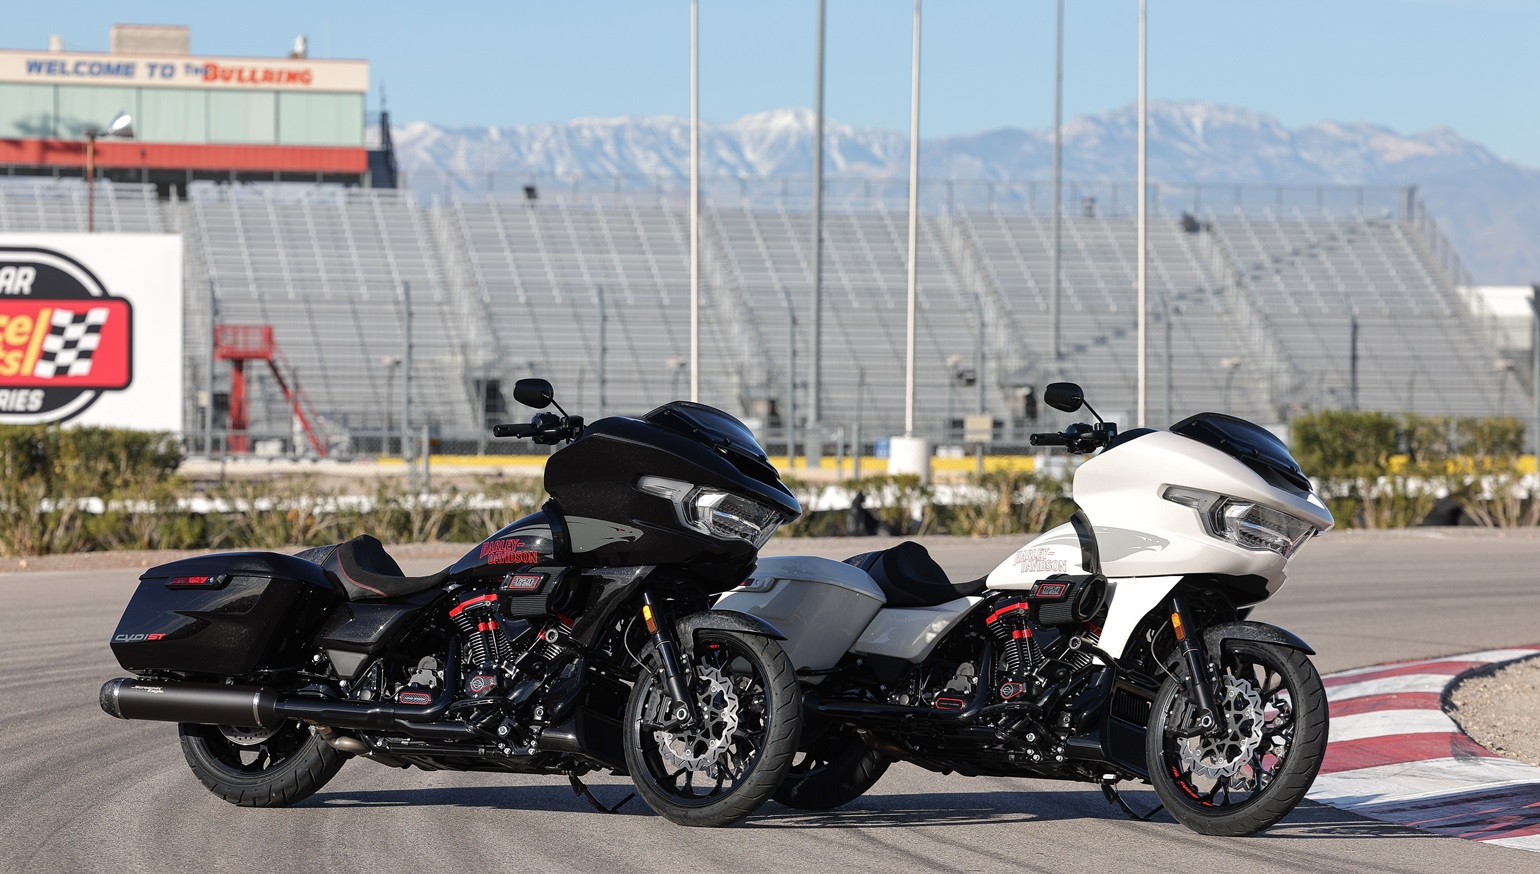 2024 Harley-Davidson CVO Road Glide STs in two colors, Golden White Pearl and Raven Metallic, parked at Las Vegas Motor Speedway